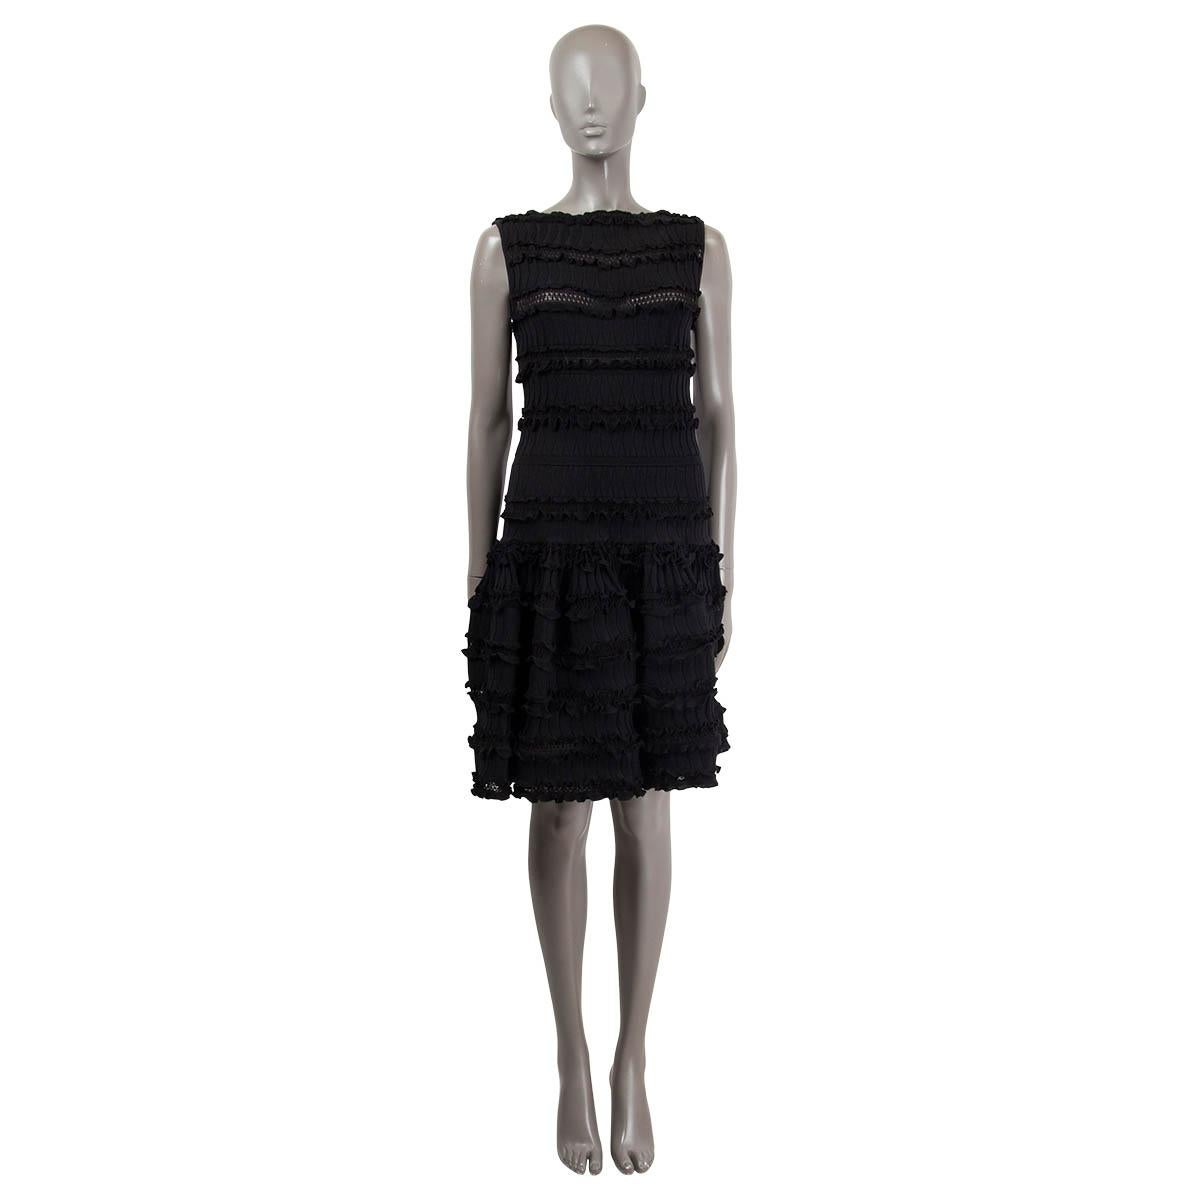 100% authentic Alaïa sleeveless flared dress in black wool (69%), polyamide (17%) and cotton (11%). Features ruffled hemline. Opens with concealed zipper on the side. Unlined. Has been worn and is in excellent condition.

Measurements
Tag